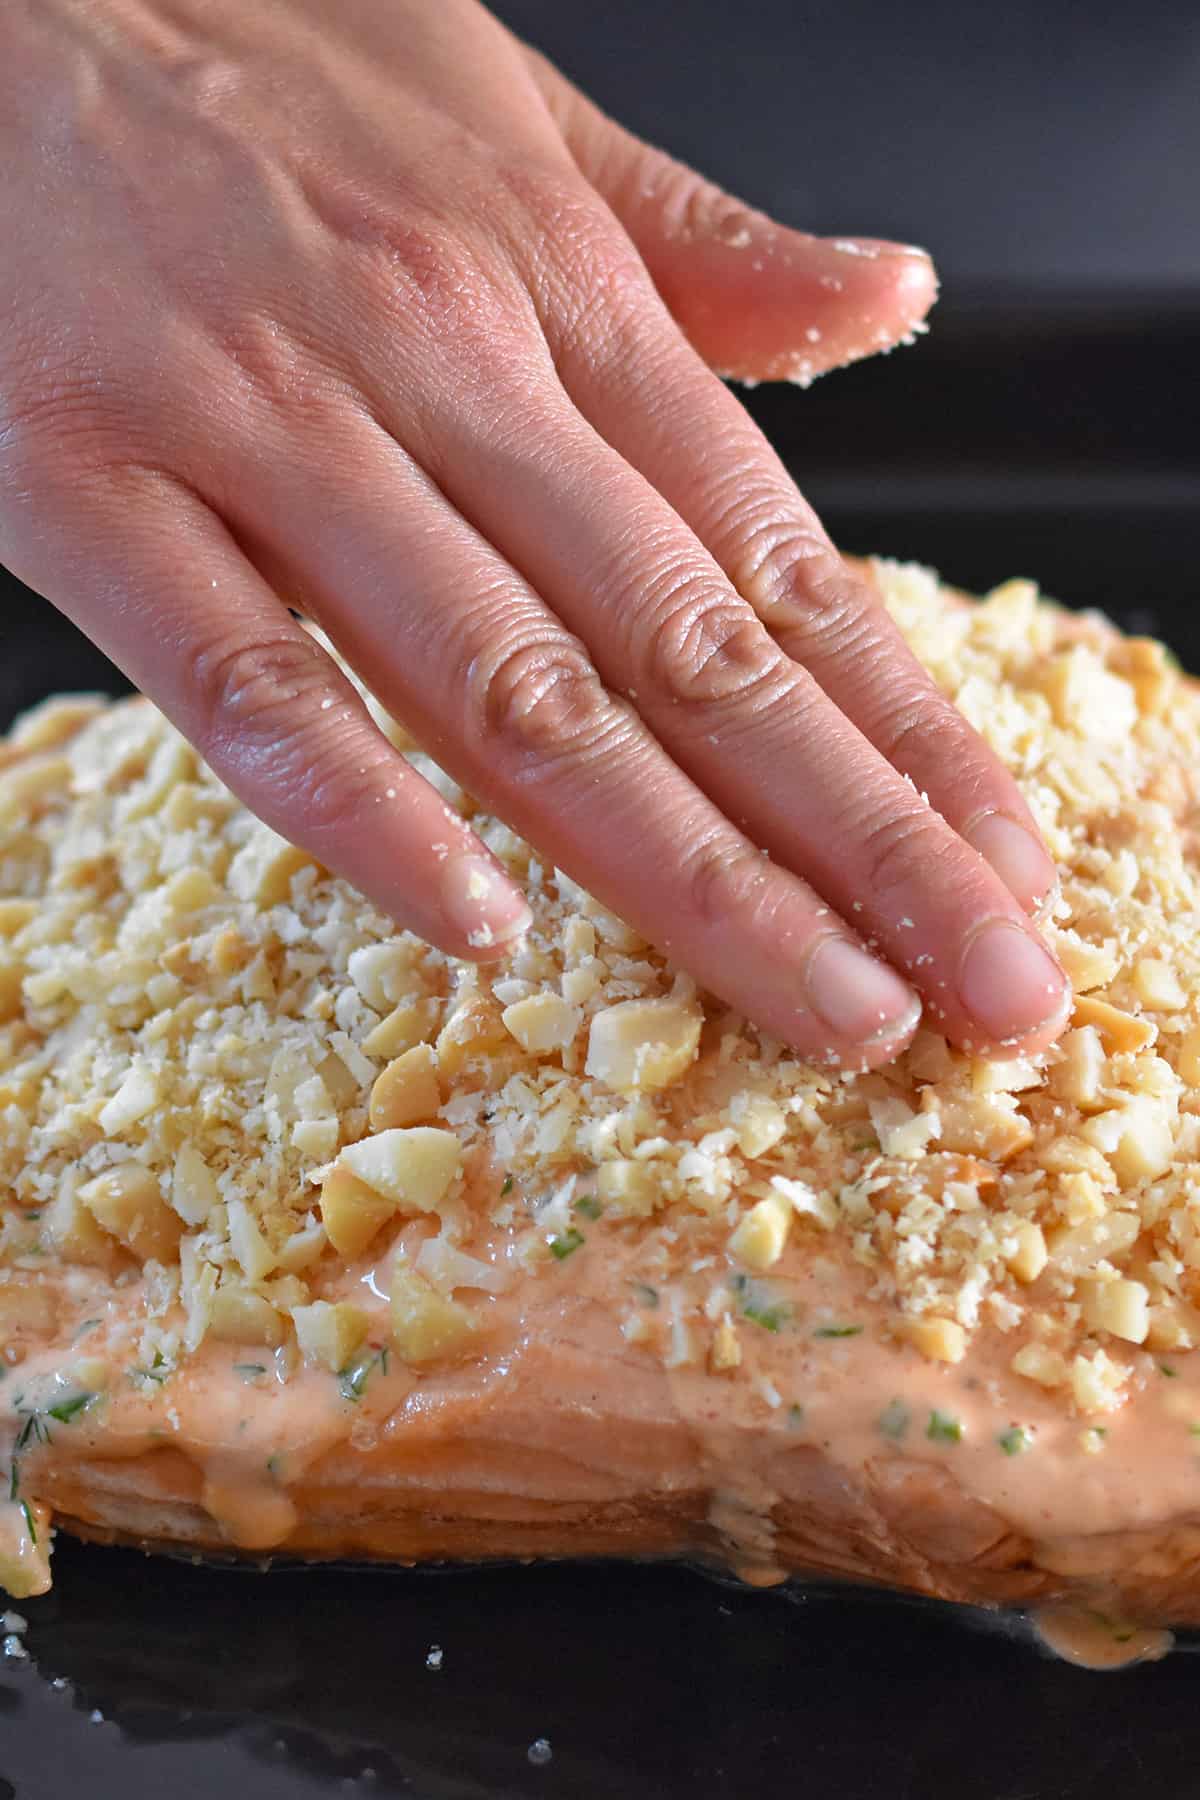 A hand is applying chopped macadamia nuts to the top of a cooked salmon fillet that is coated with sriracha ranch dressing.